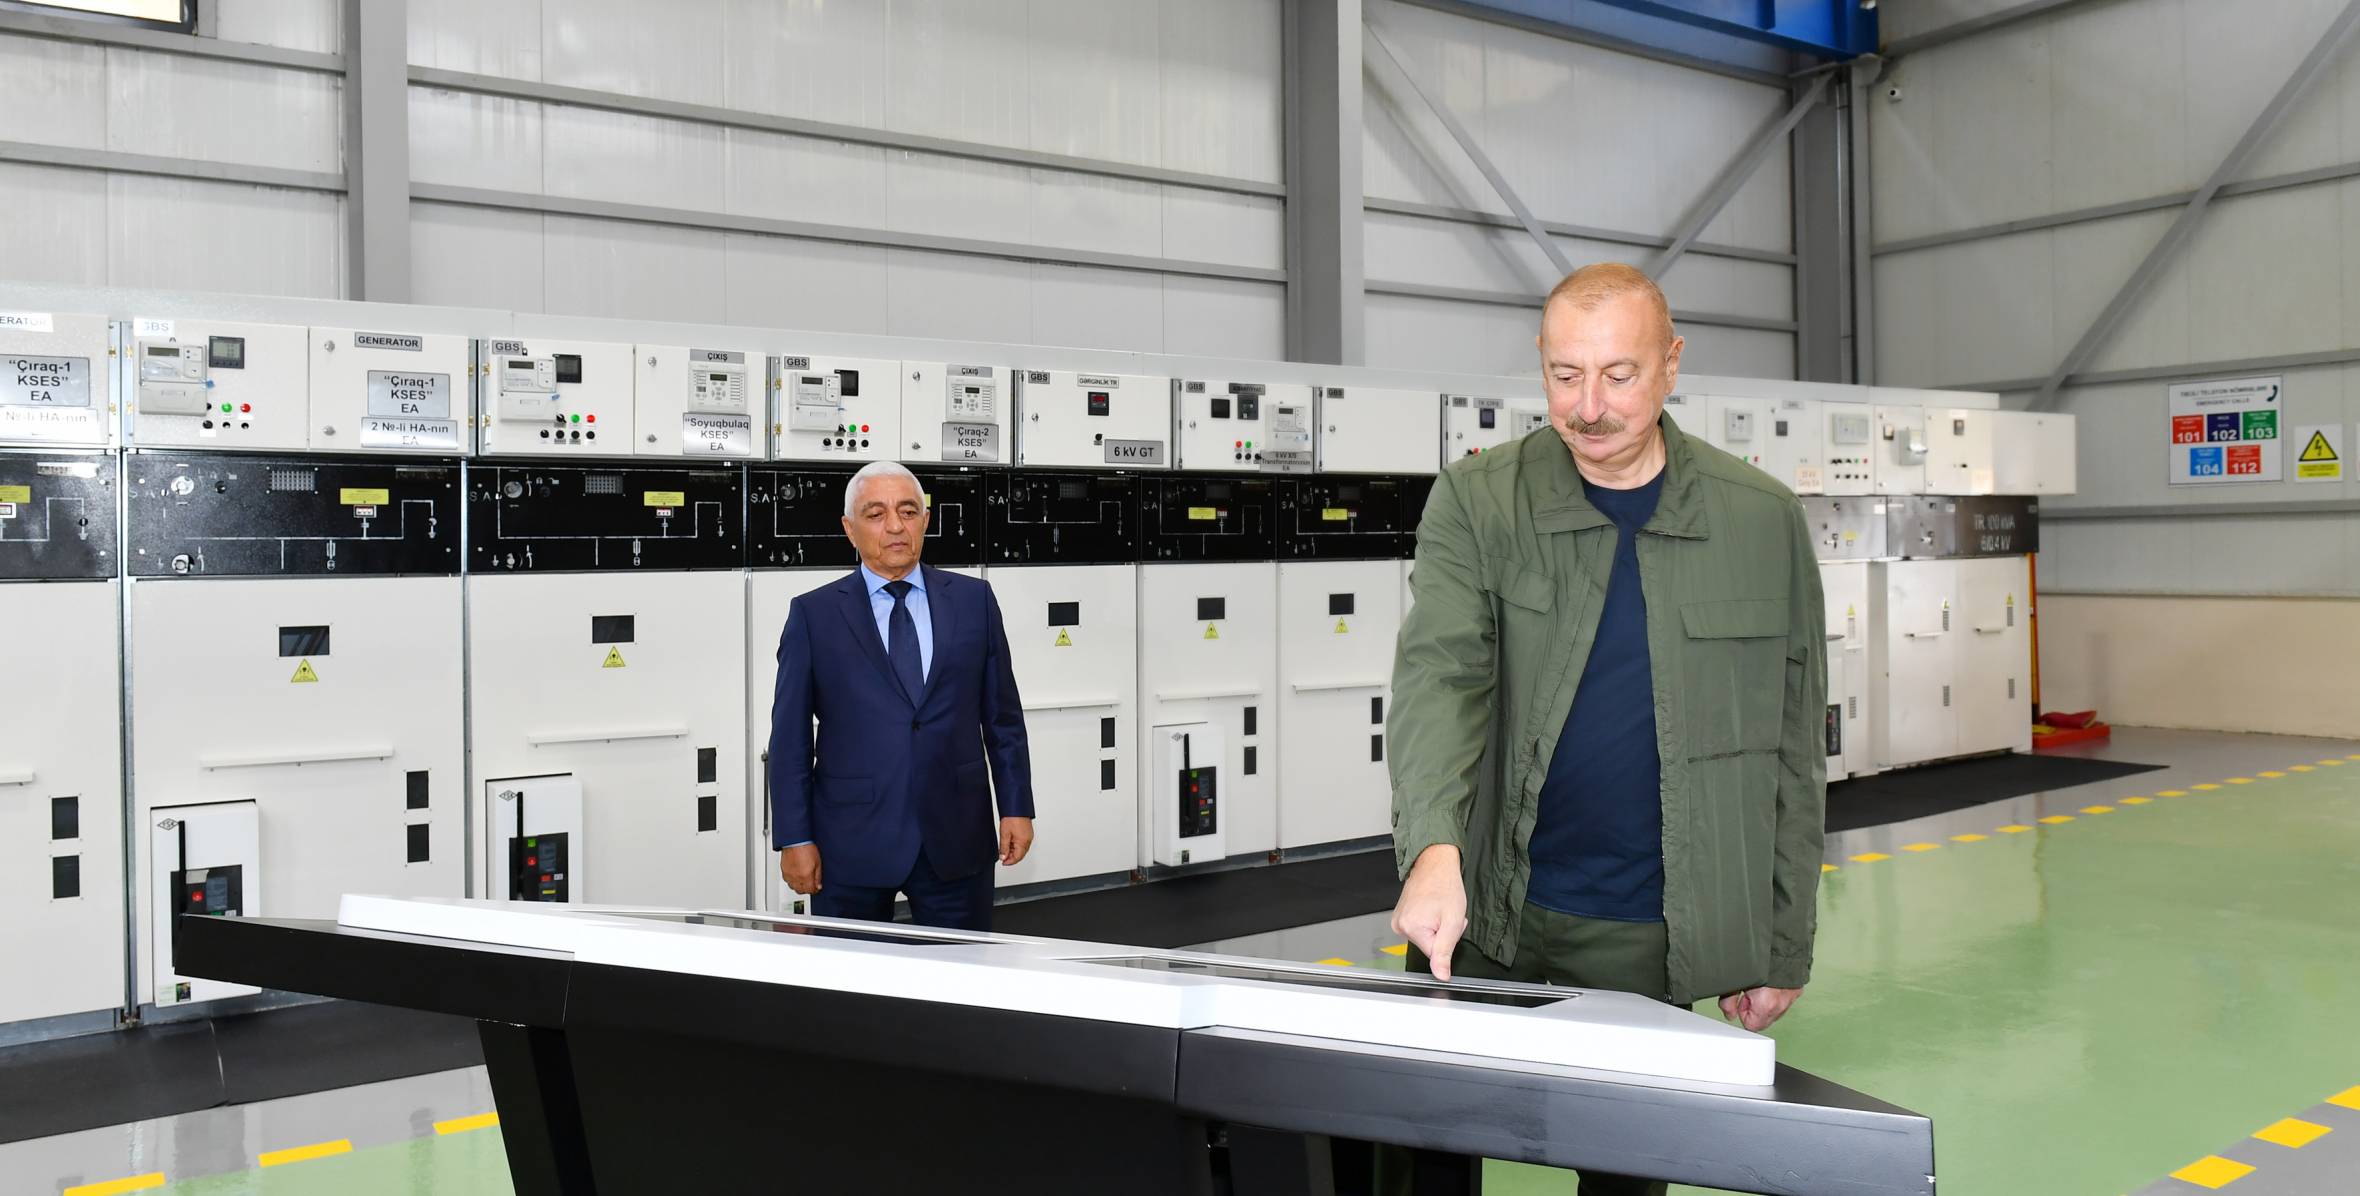 Ilham Aliyev has attended the opening of the “Chirag-1” and “Chirag-2” small hydroelectric power stations owned by Azerenergy Open Joint-Stock Company in the Kalbajar district